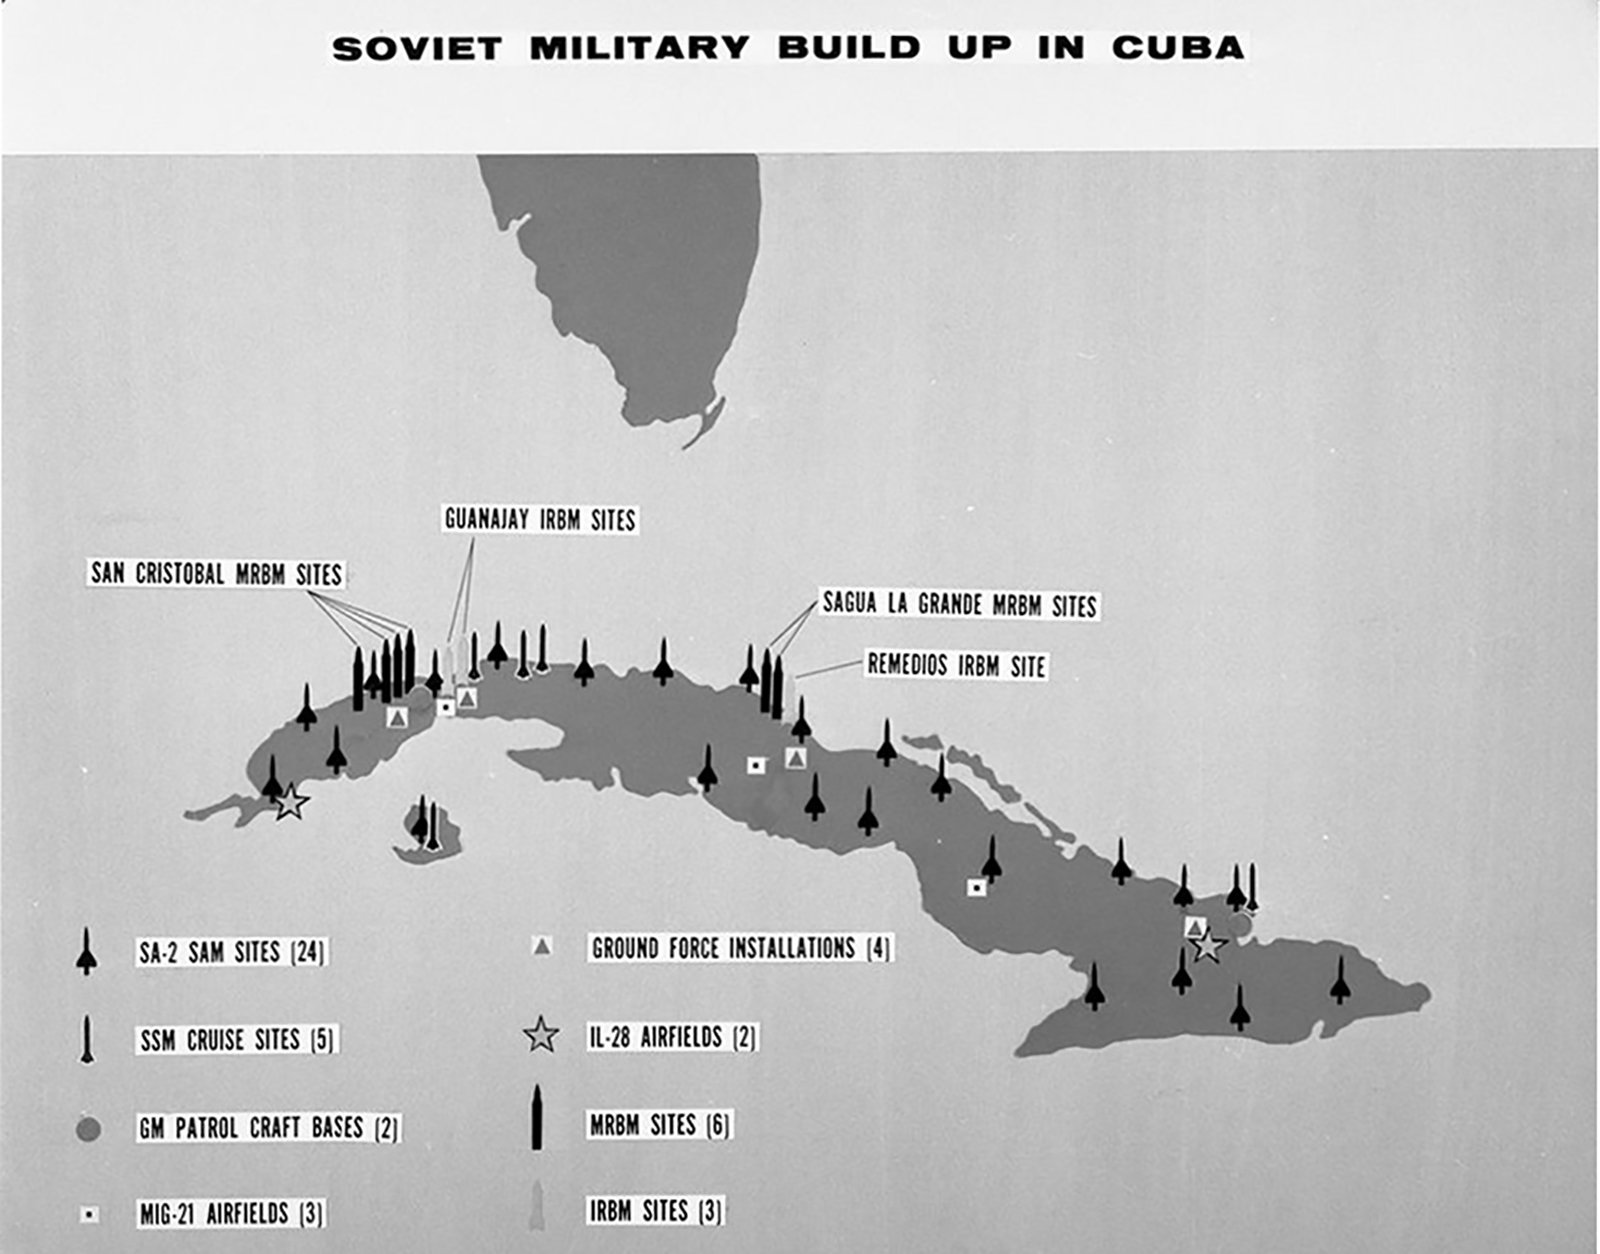 Cuban missile crisis | History, Facts, & Significance | Britannica